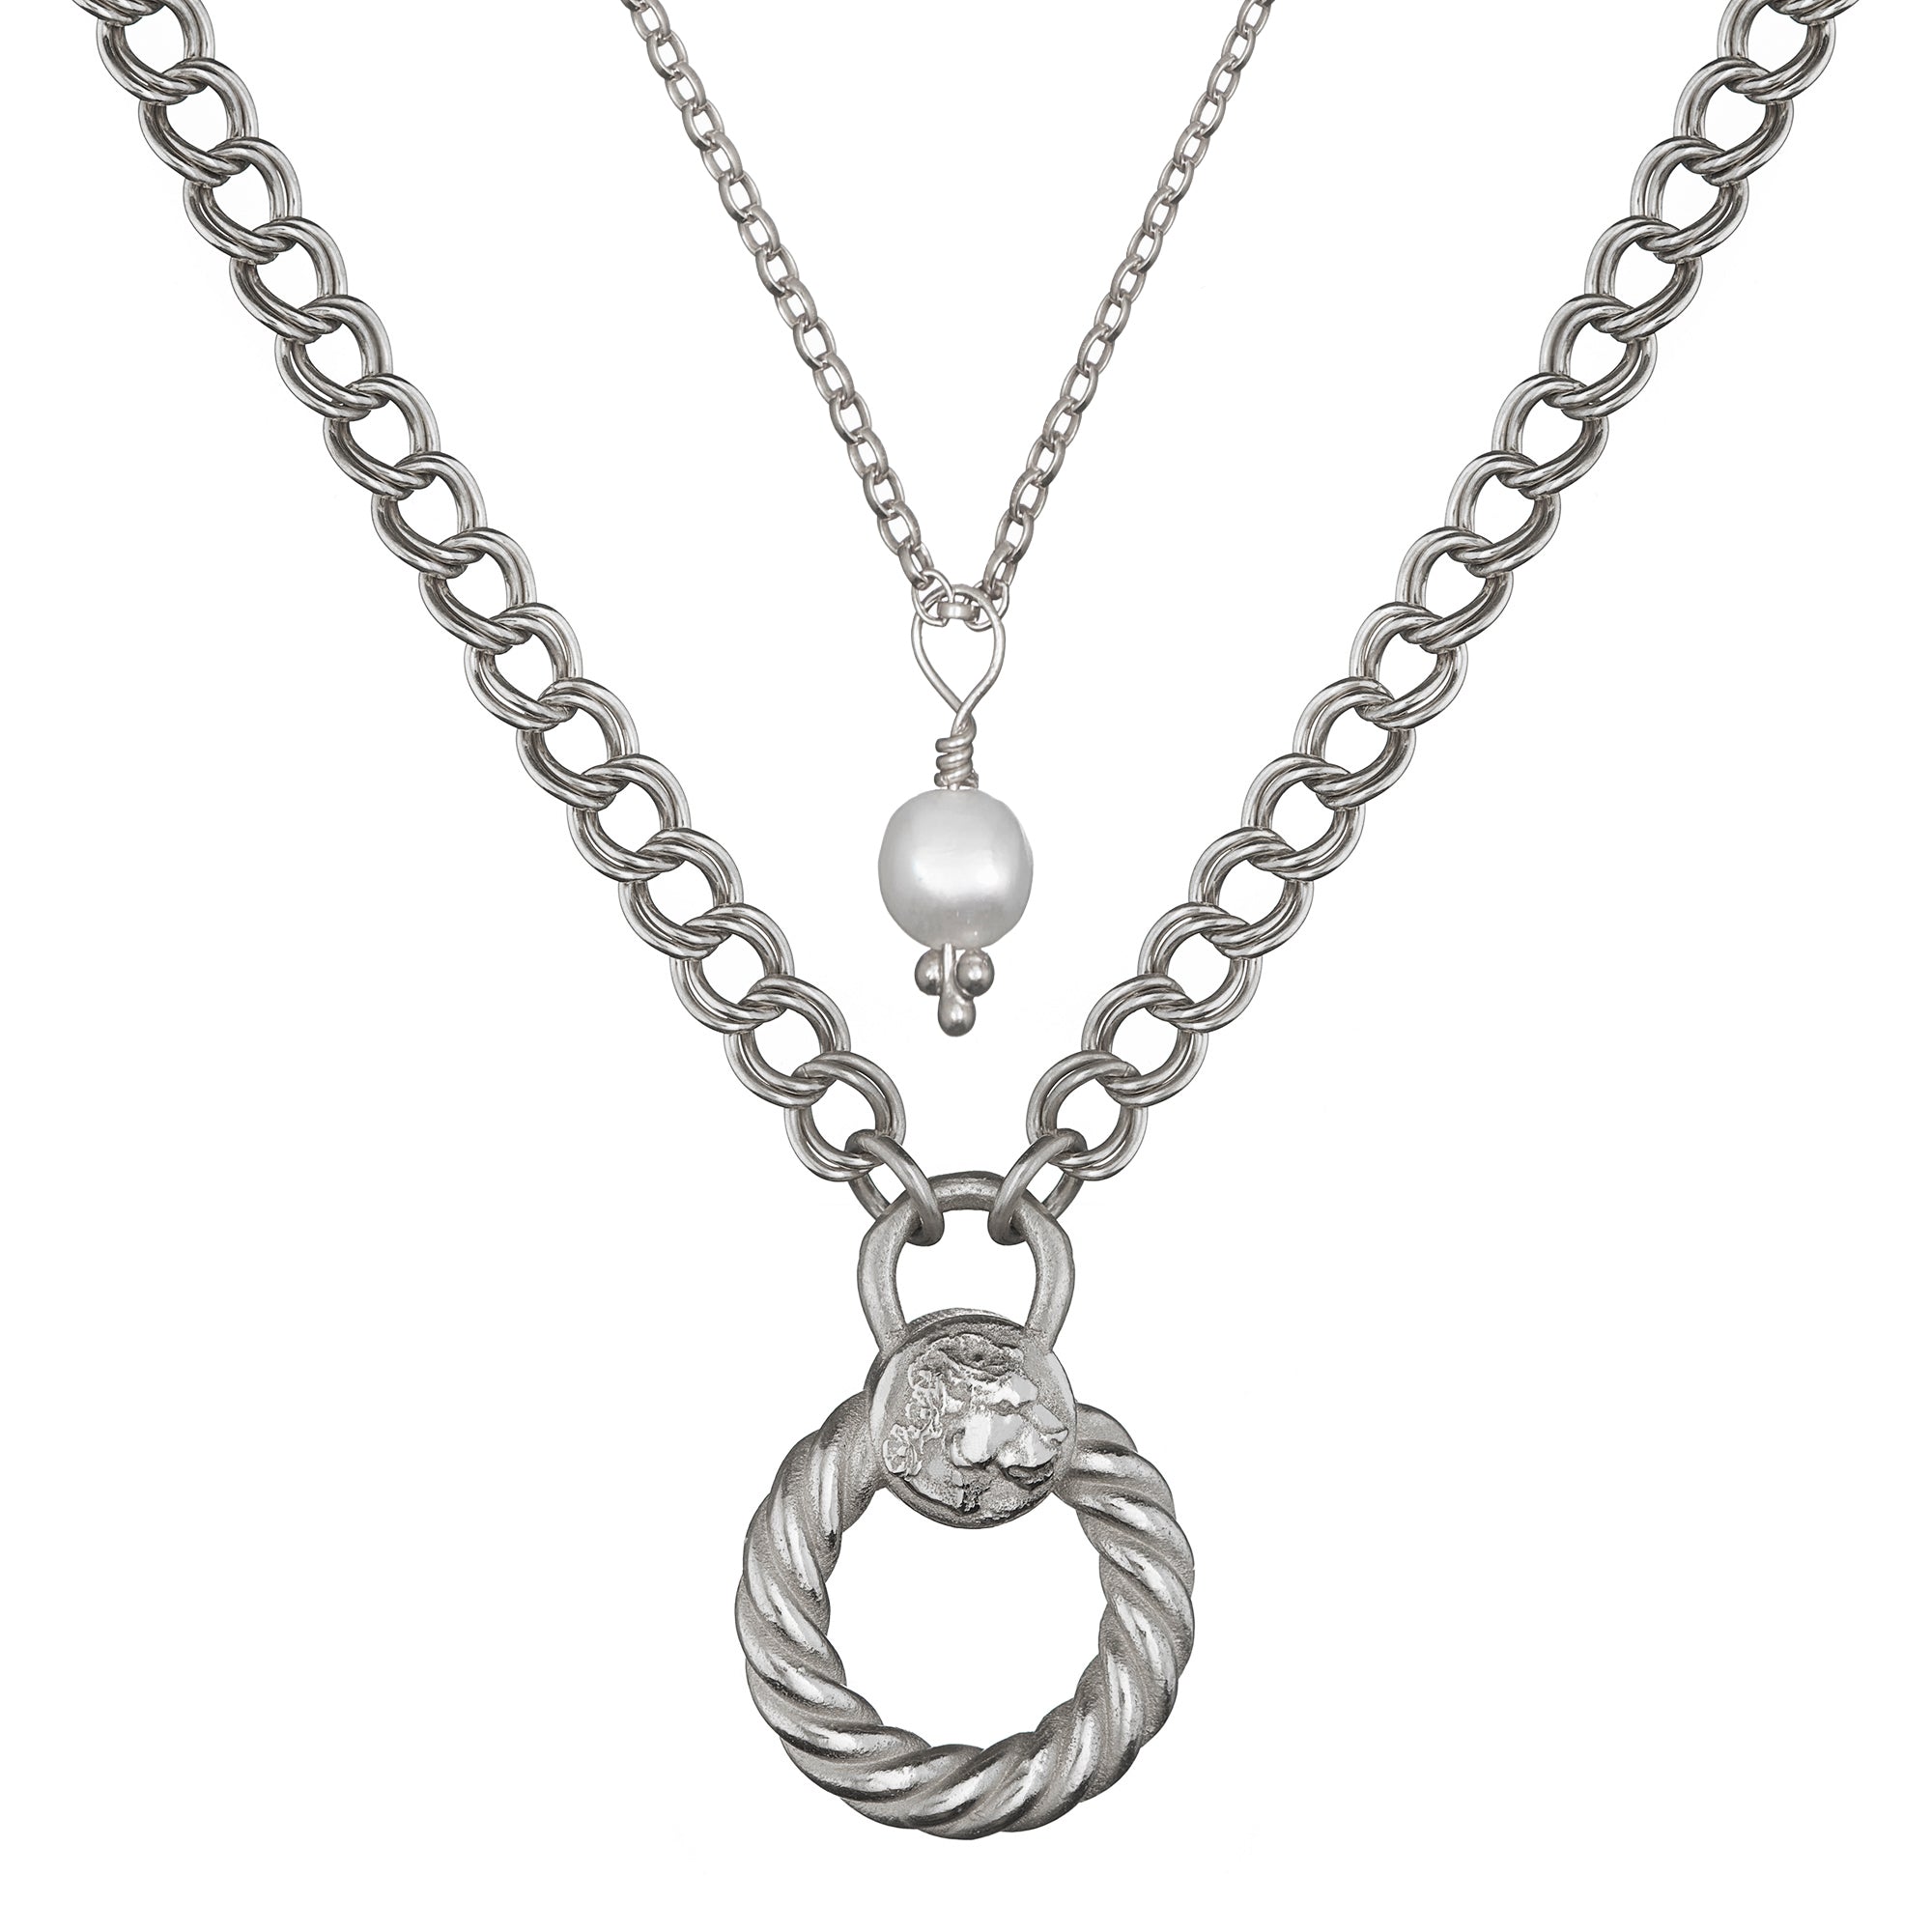 ETERNITY LIONESS NECKLACE & FRESHWATER PEARL PENDANT